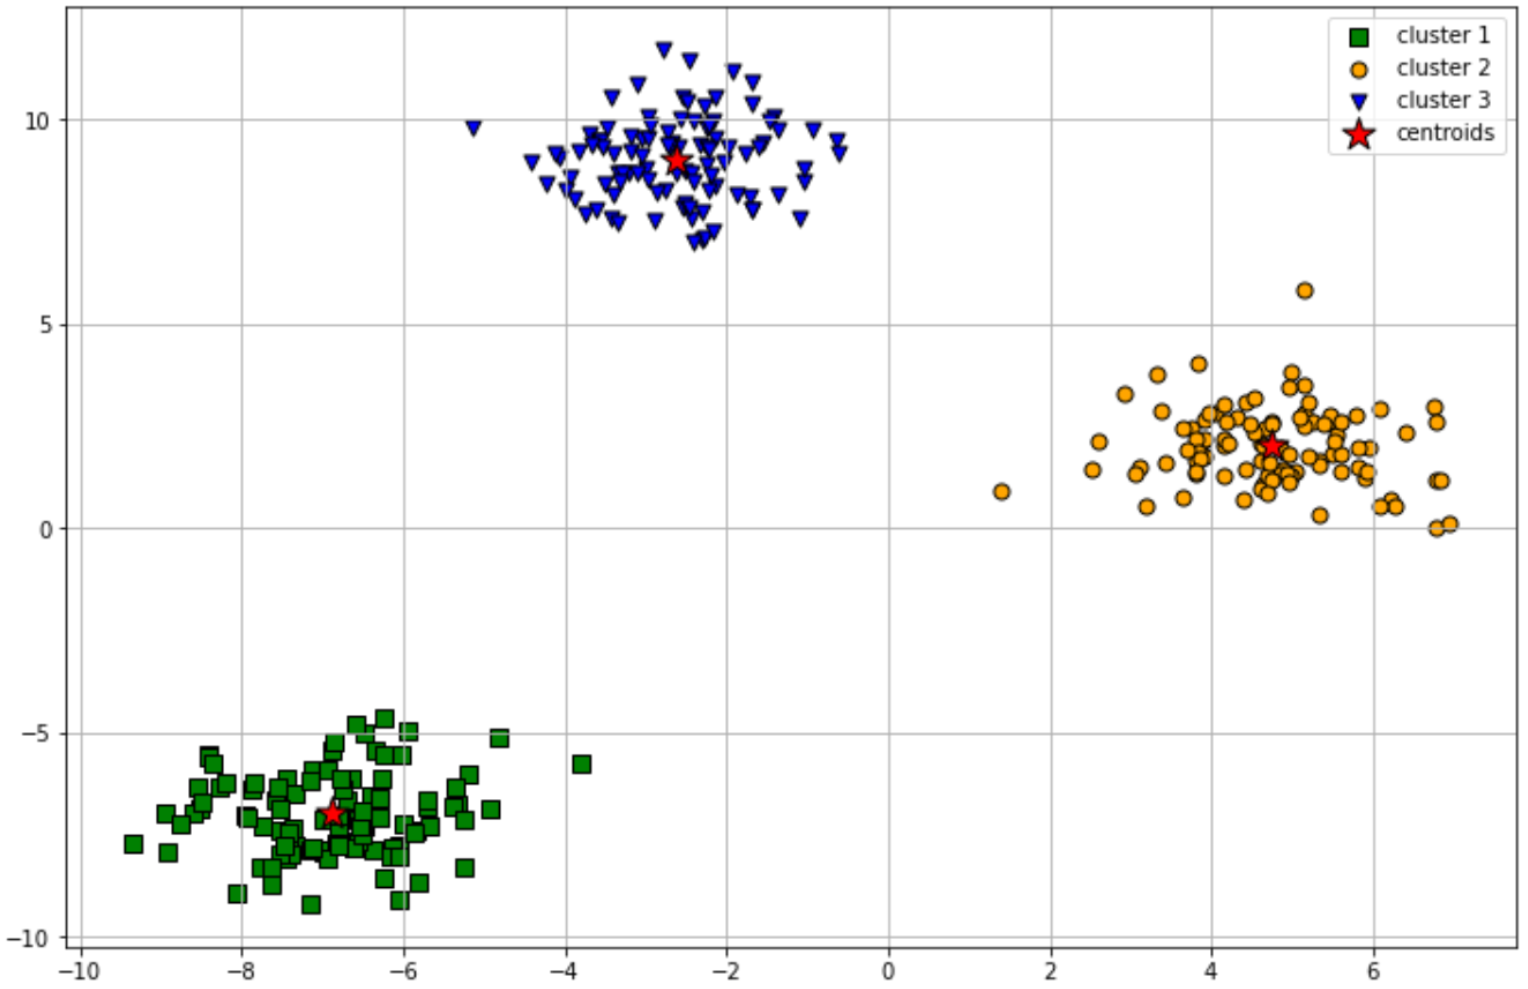 Machine learning clustering result of the scattered data points